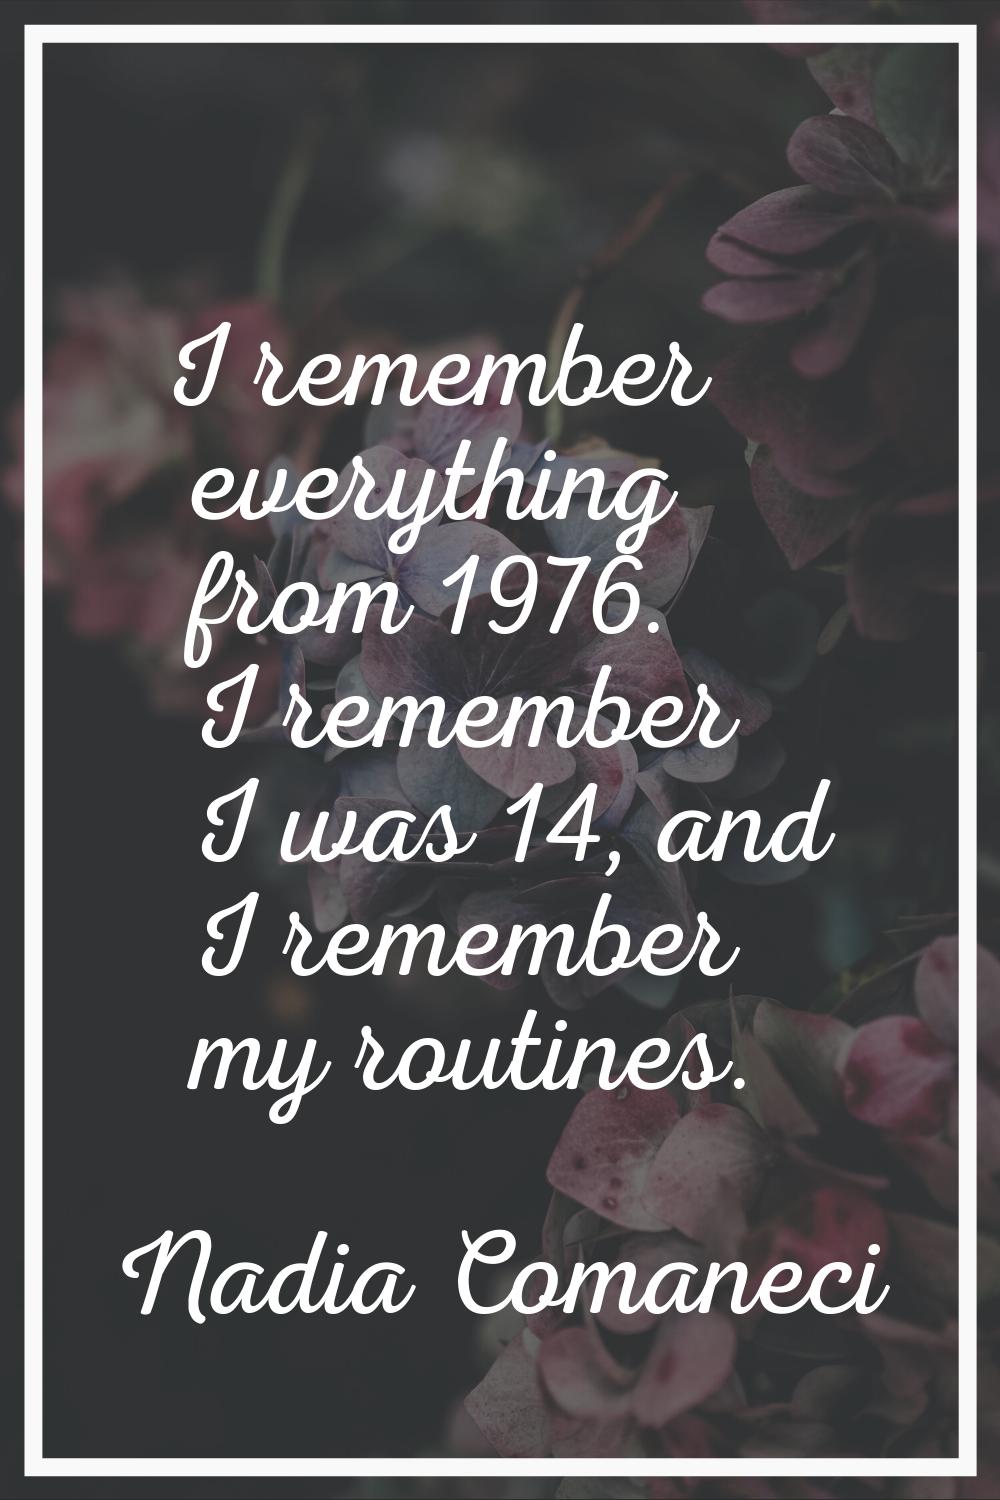 I remember everything from 1976. I remember I was 14, and I remember my routines.